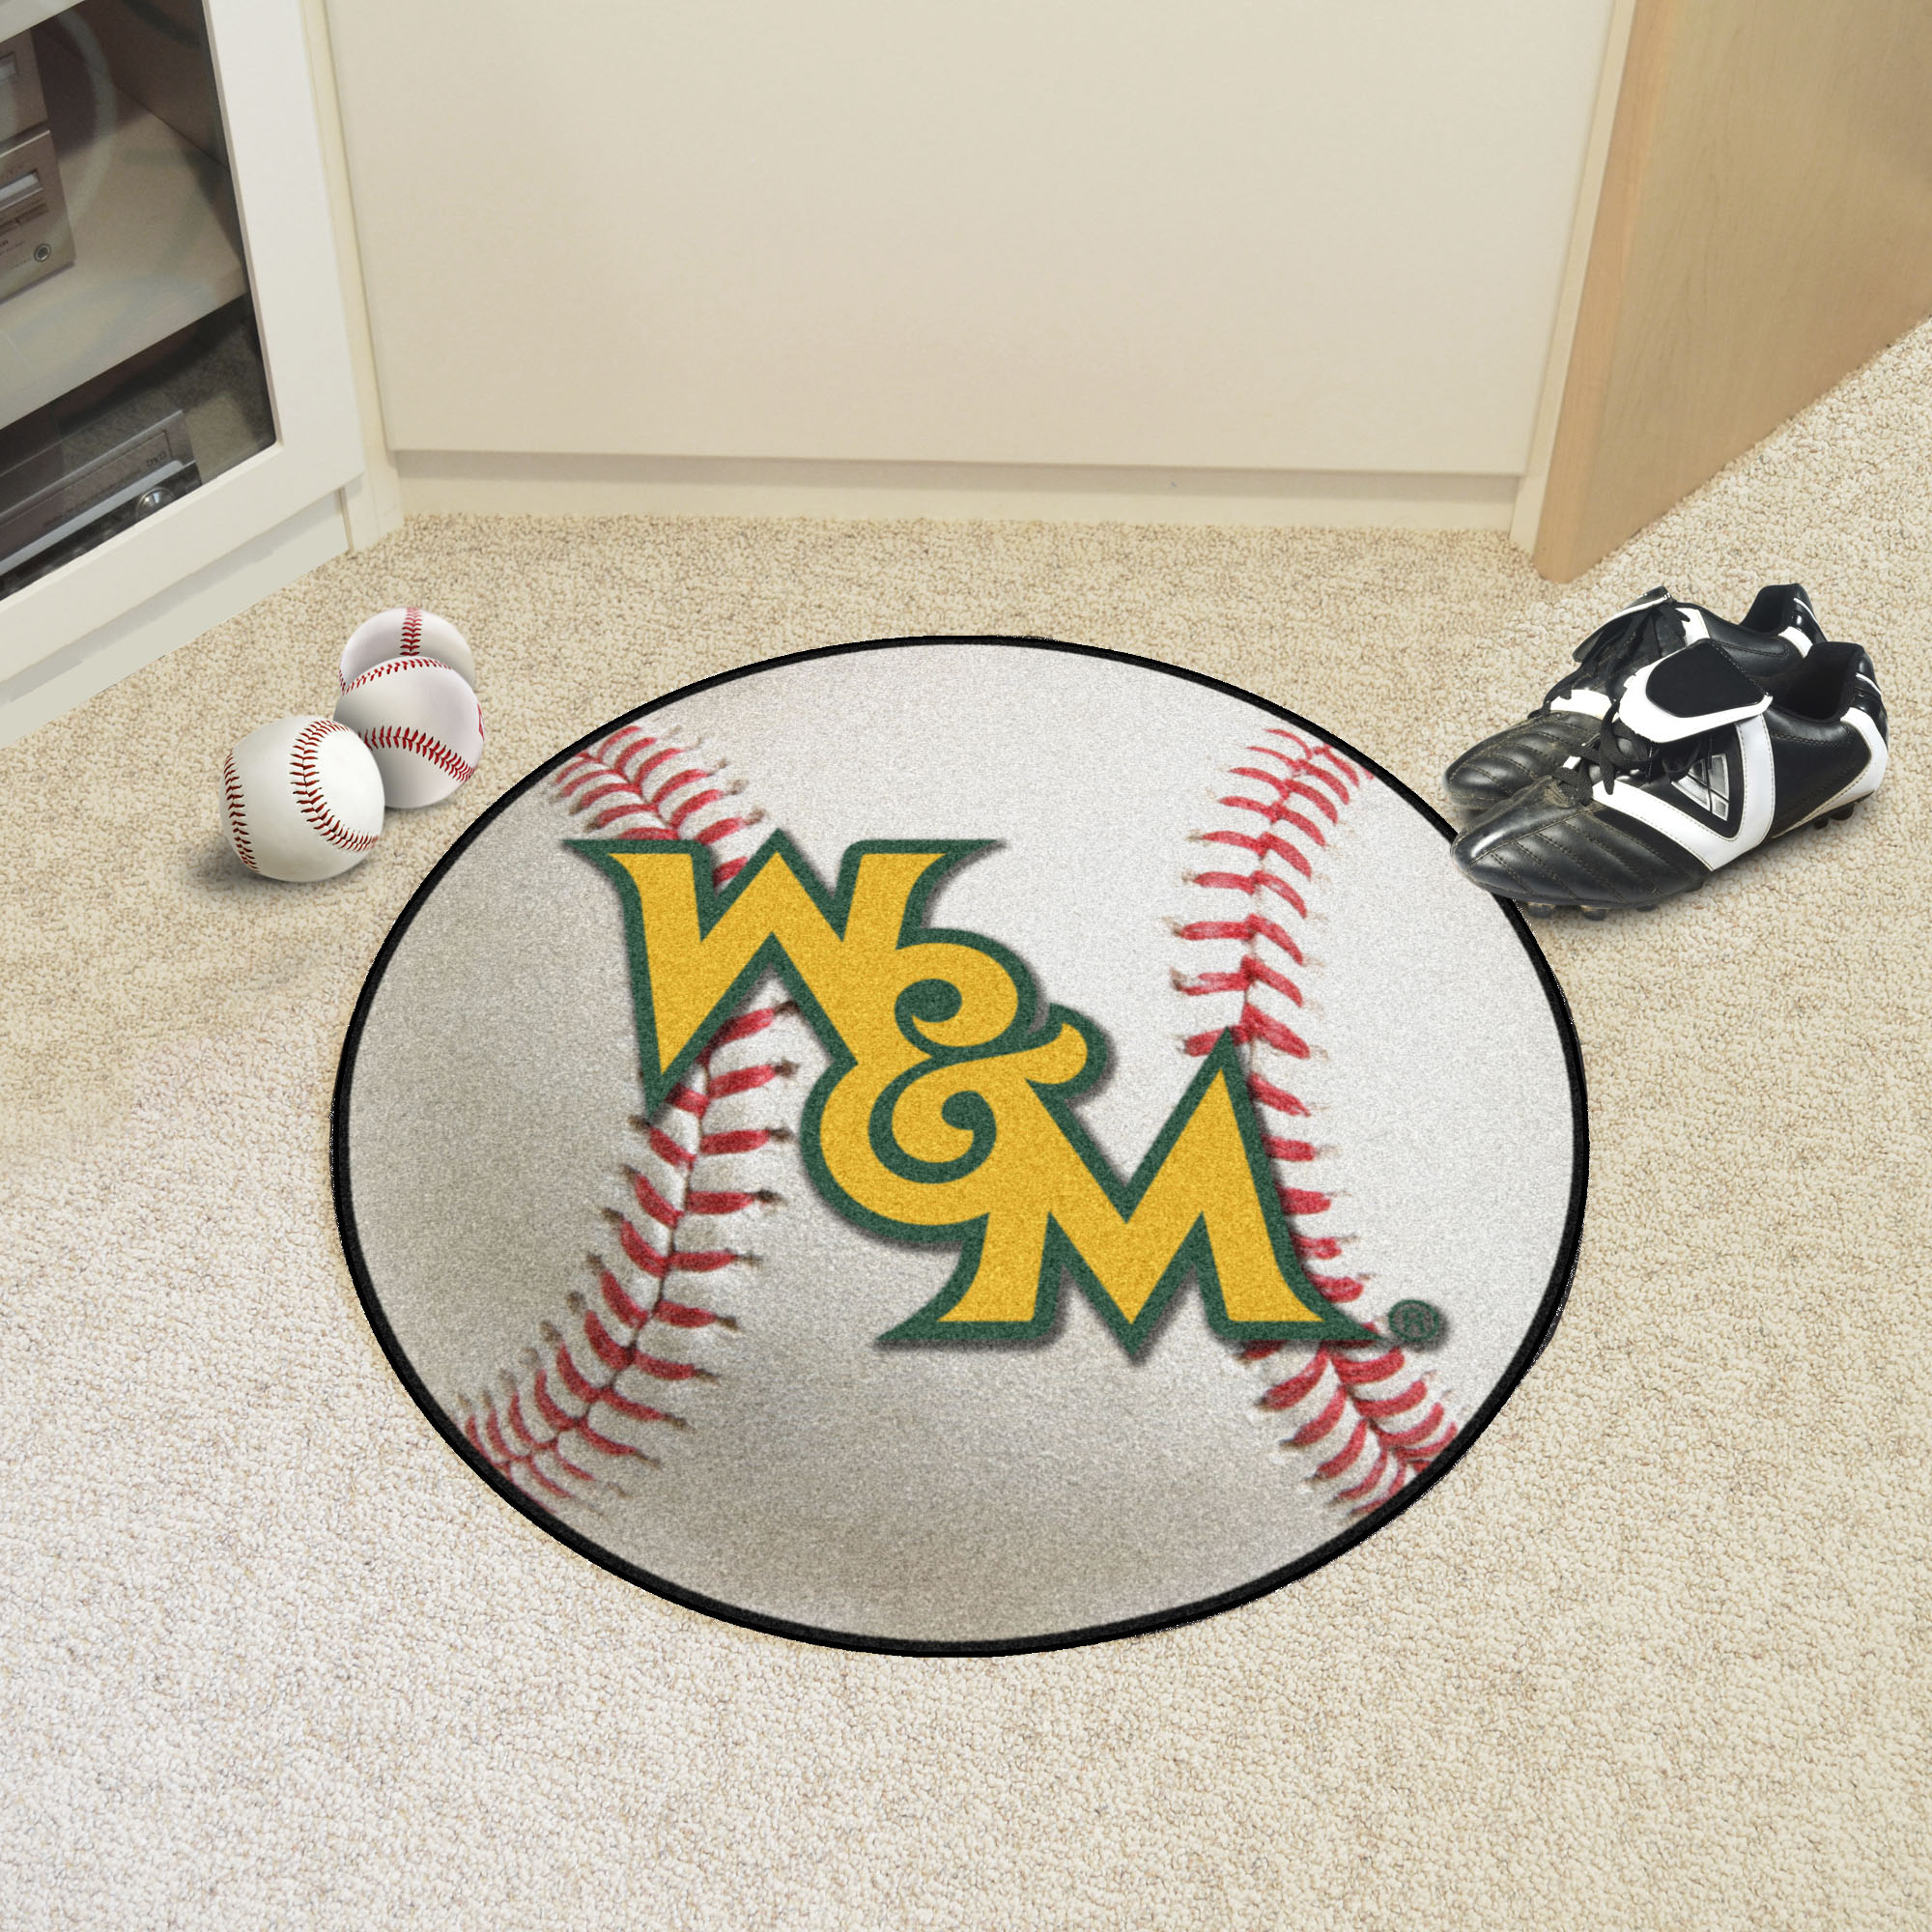 College of William & Mary Ball-Shaped Area Rugs (Ball Shaped Area Rugs: Baseball)